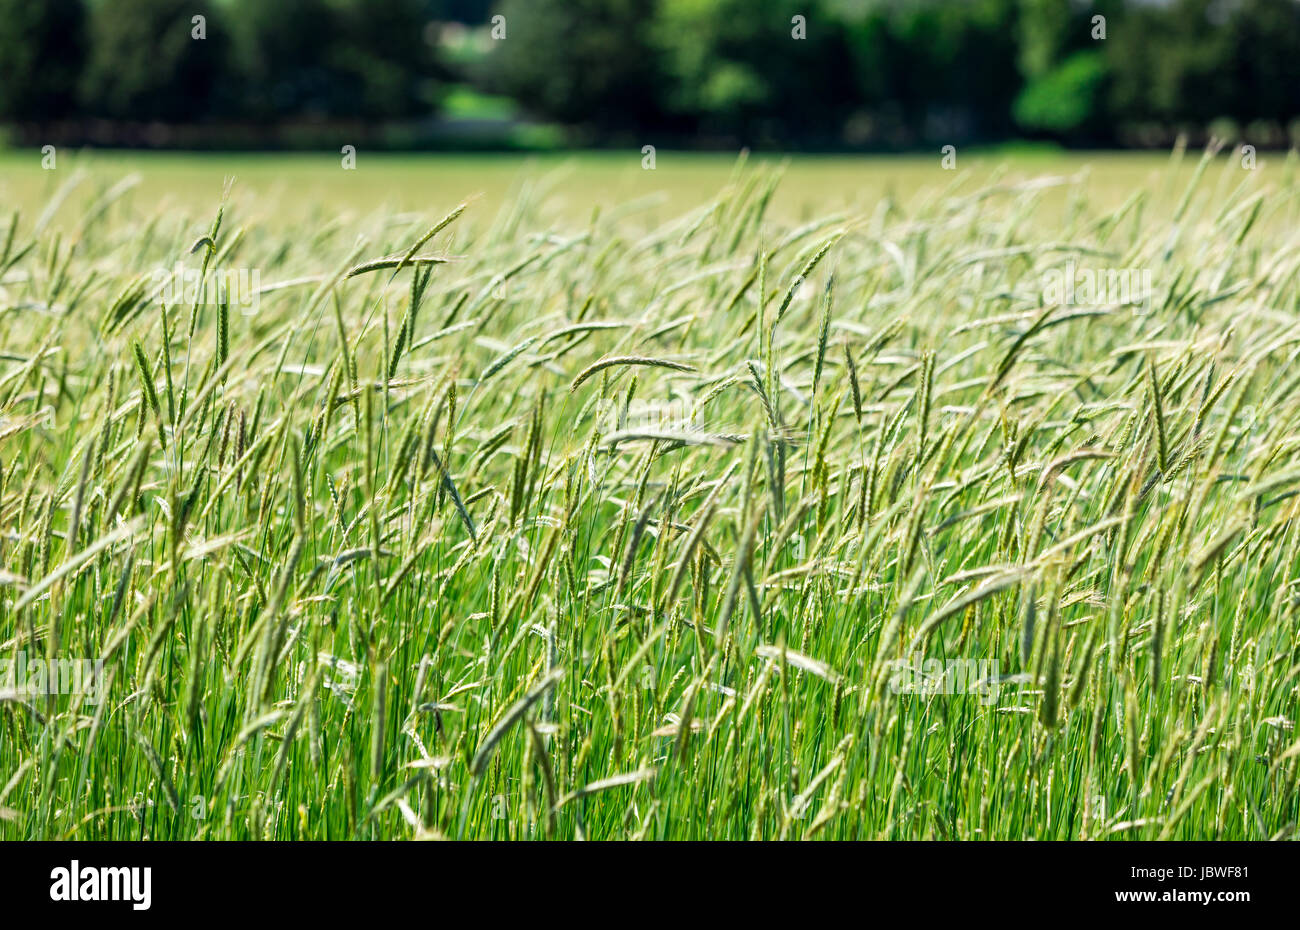 green grass and a distant landscape of trees Stock Photo